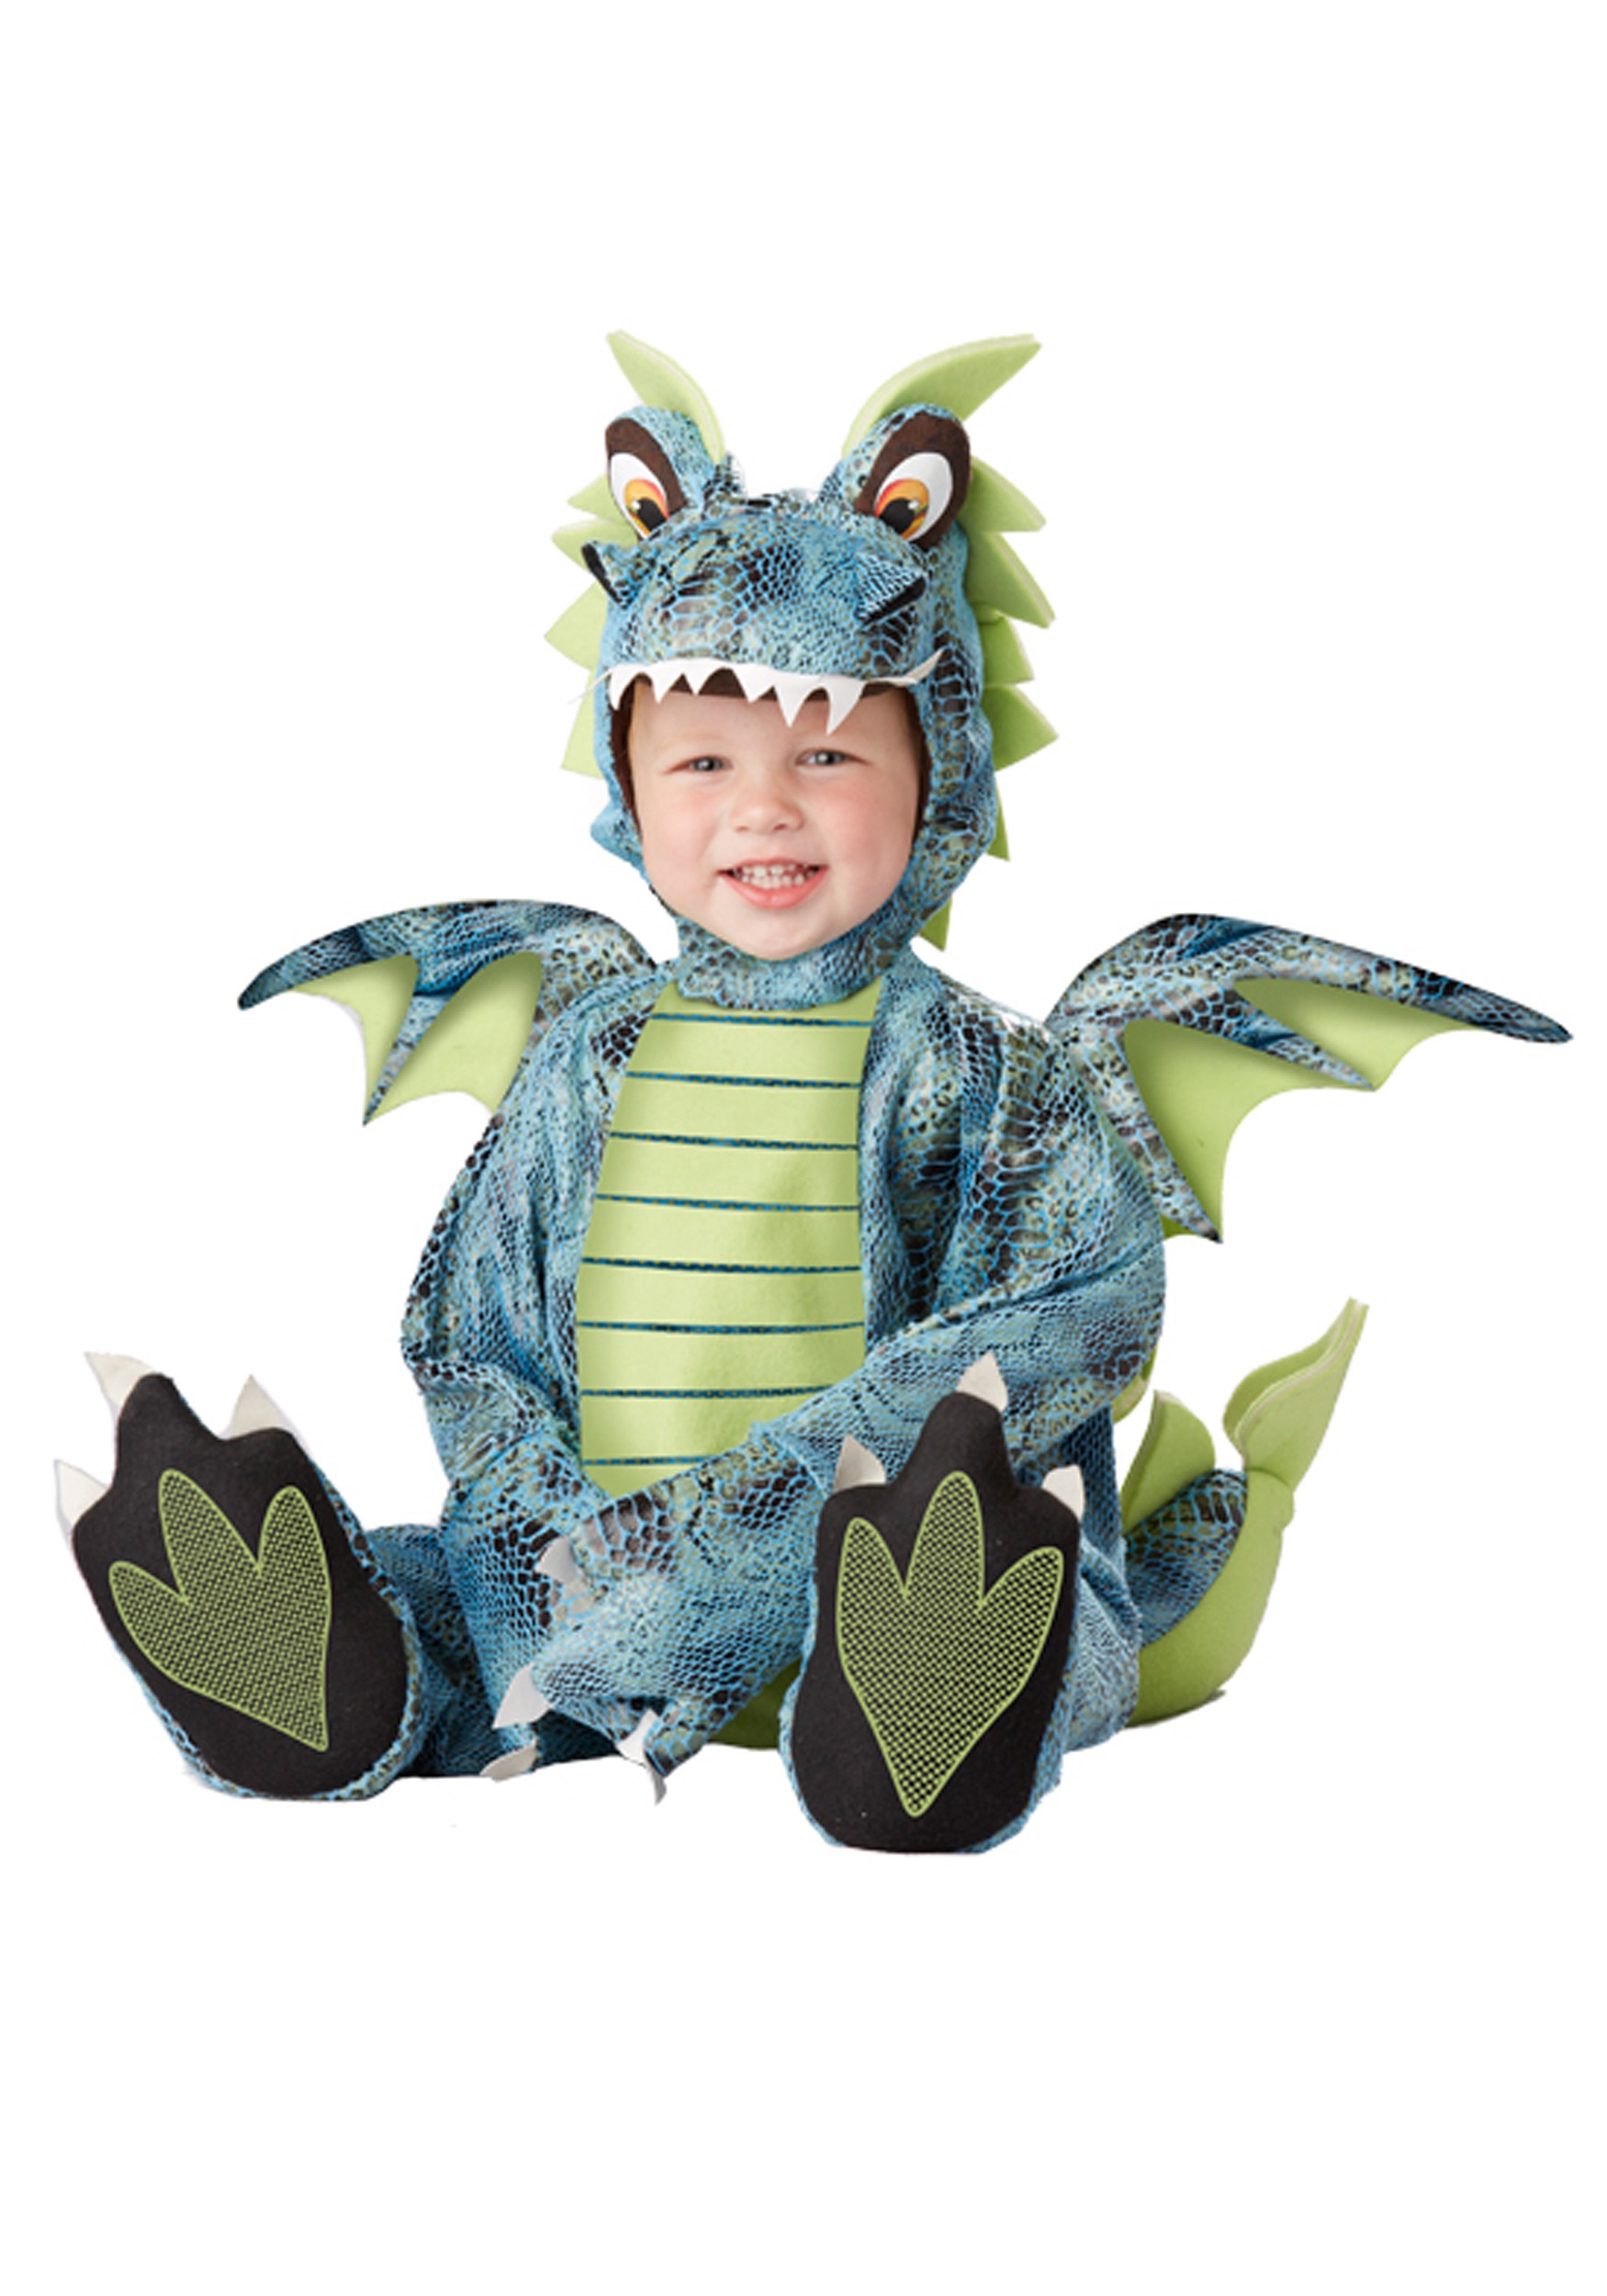 Photos - Fancy Dress California Costume Collection Darling Dragon Costume Green/Blue CA1002 